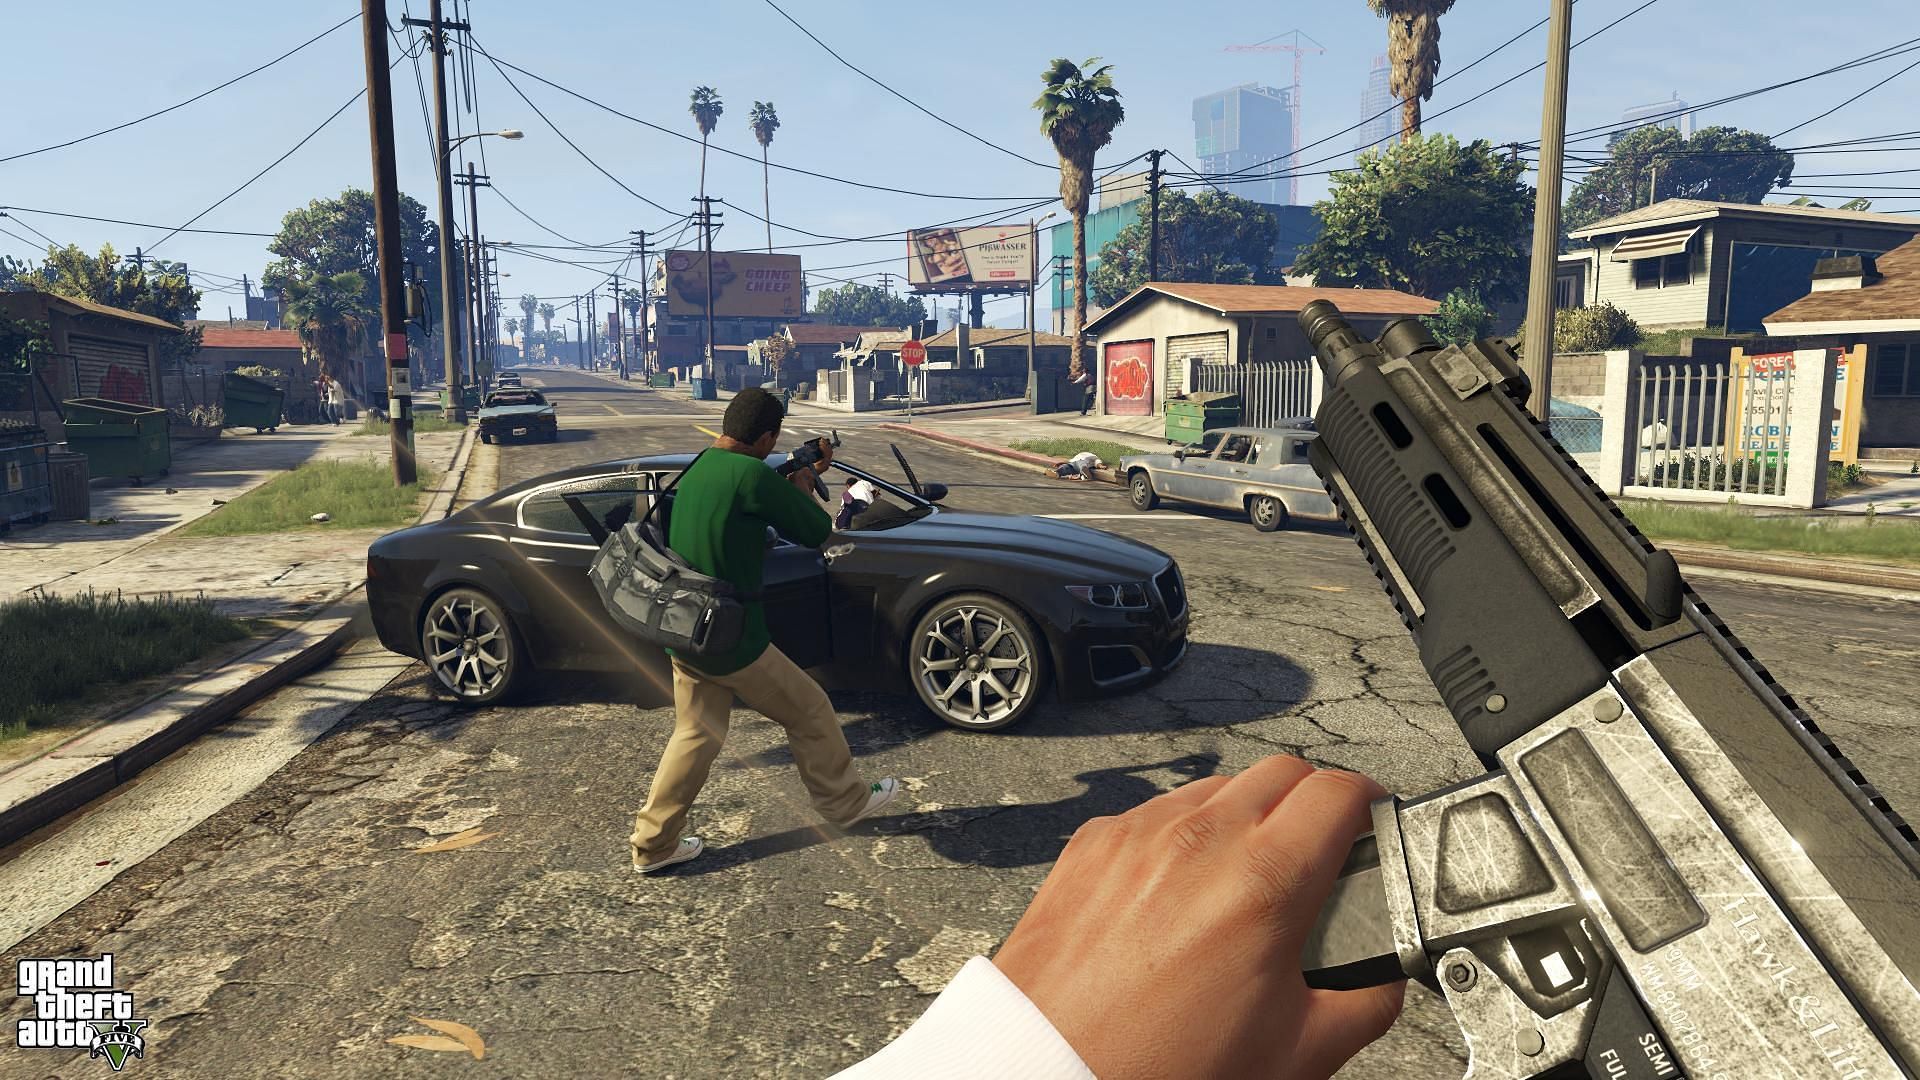 5 of the most fun GTA 5 gameplay features worth reminiscing about